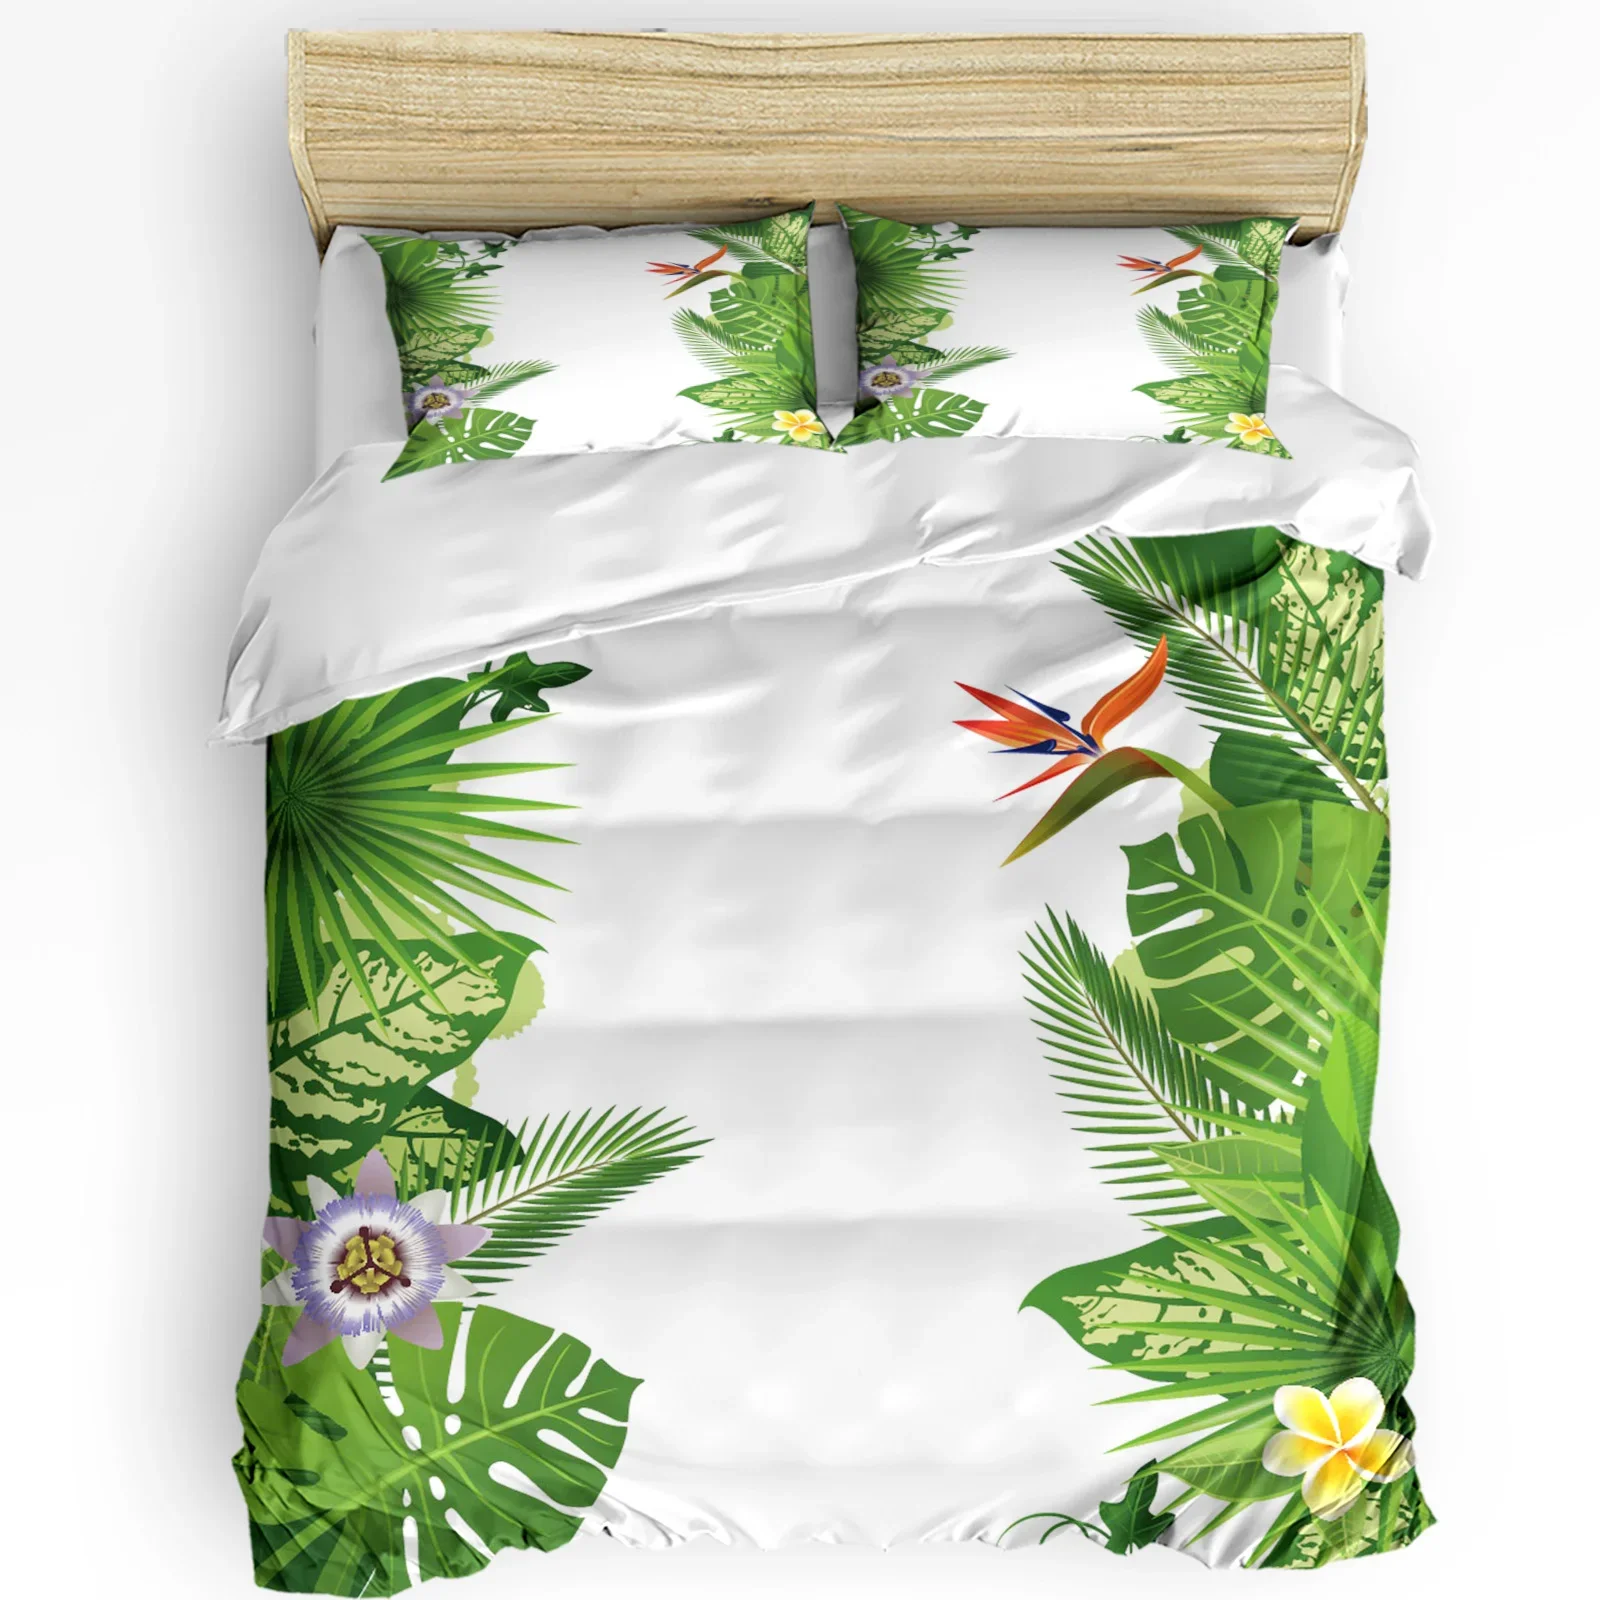 

Green Leaves Banana Tropical Jungle Plant 3pcs Bedding Set For Double Bed Home Textile Duvet Cover Quilt Cover Pillowcase